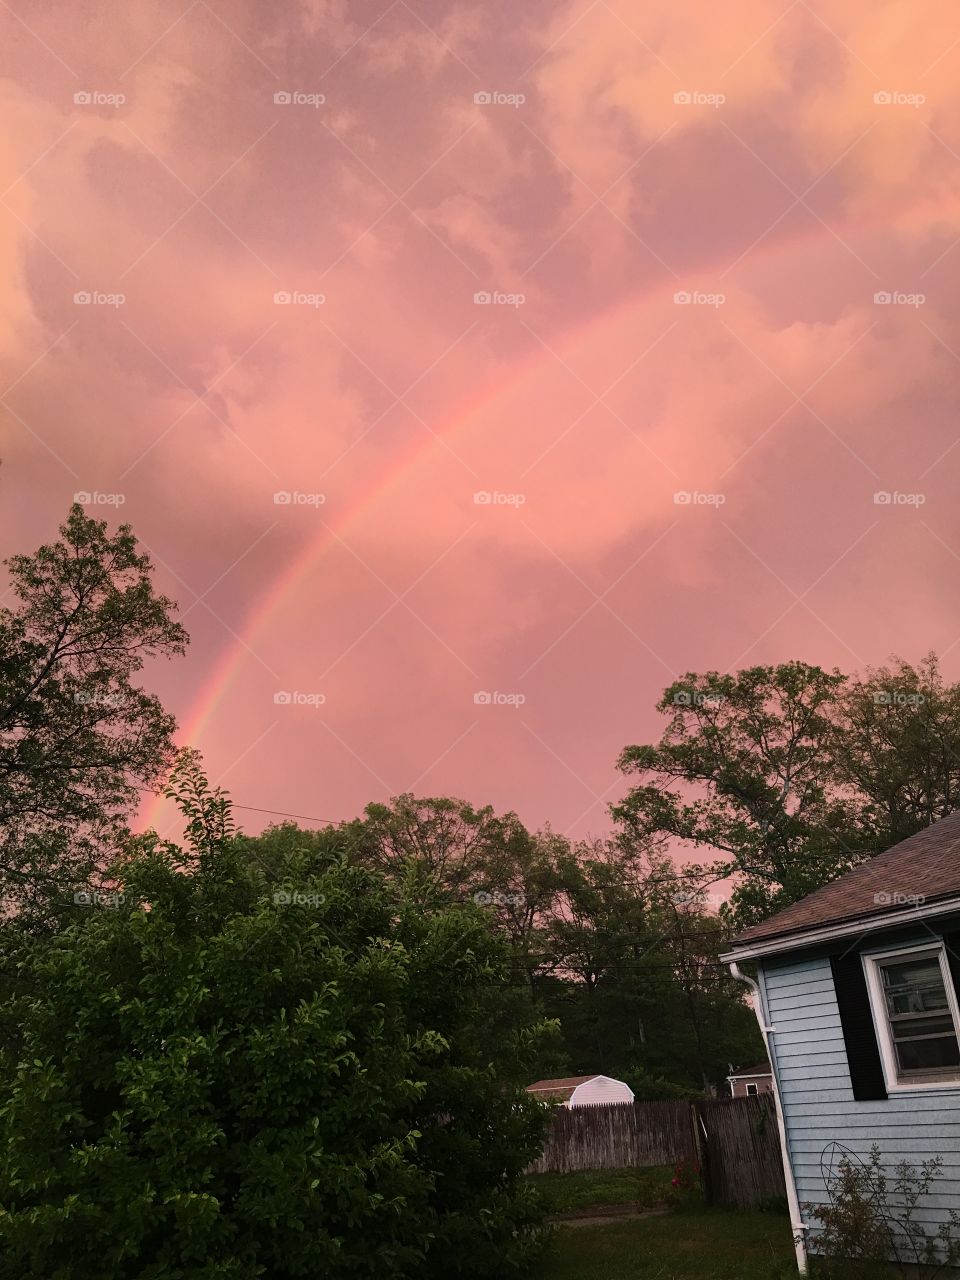 Rainbow and sunset over my house 